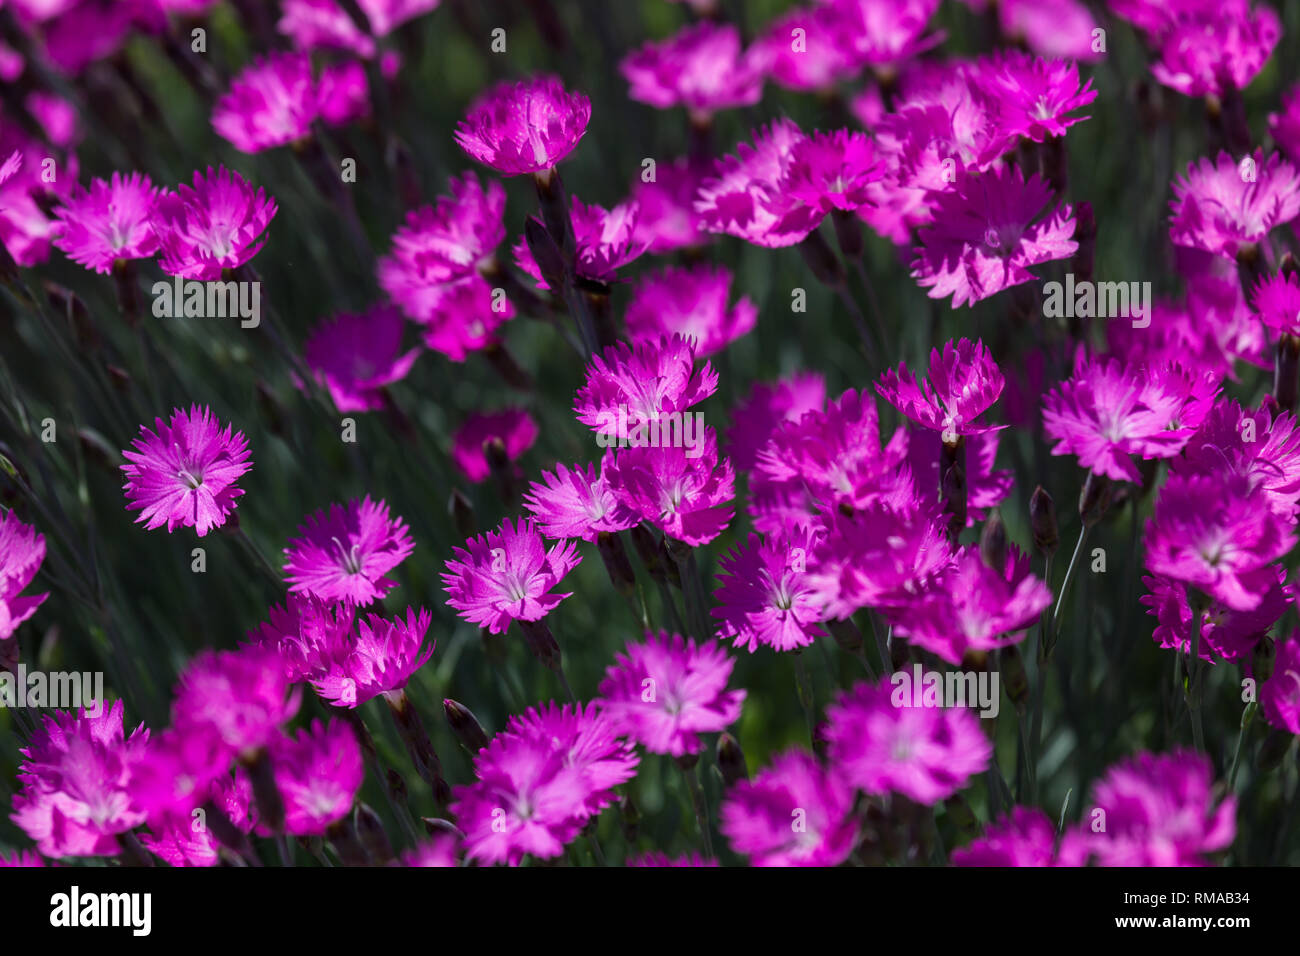 A group of bright pink dianthus flowers with blurred edges and background. Stock Photo